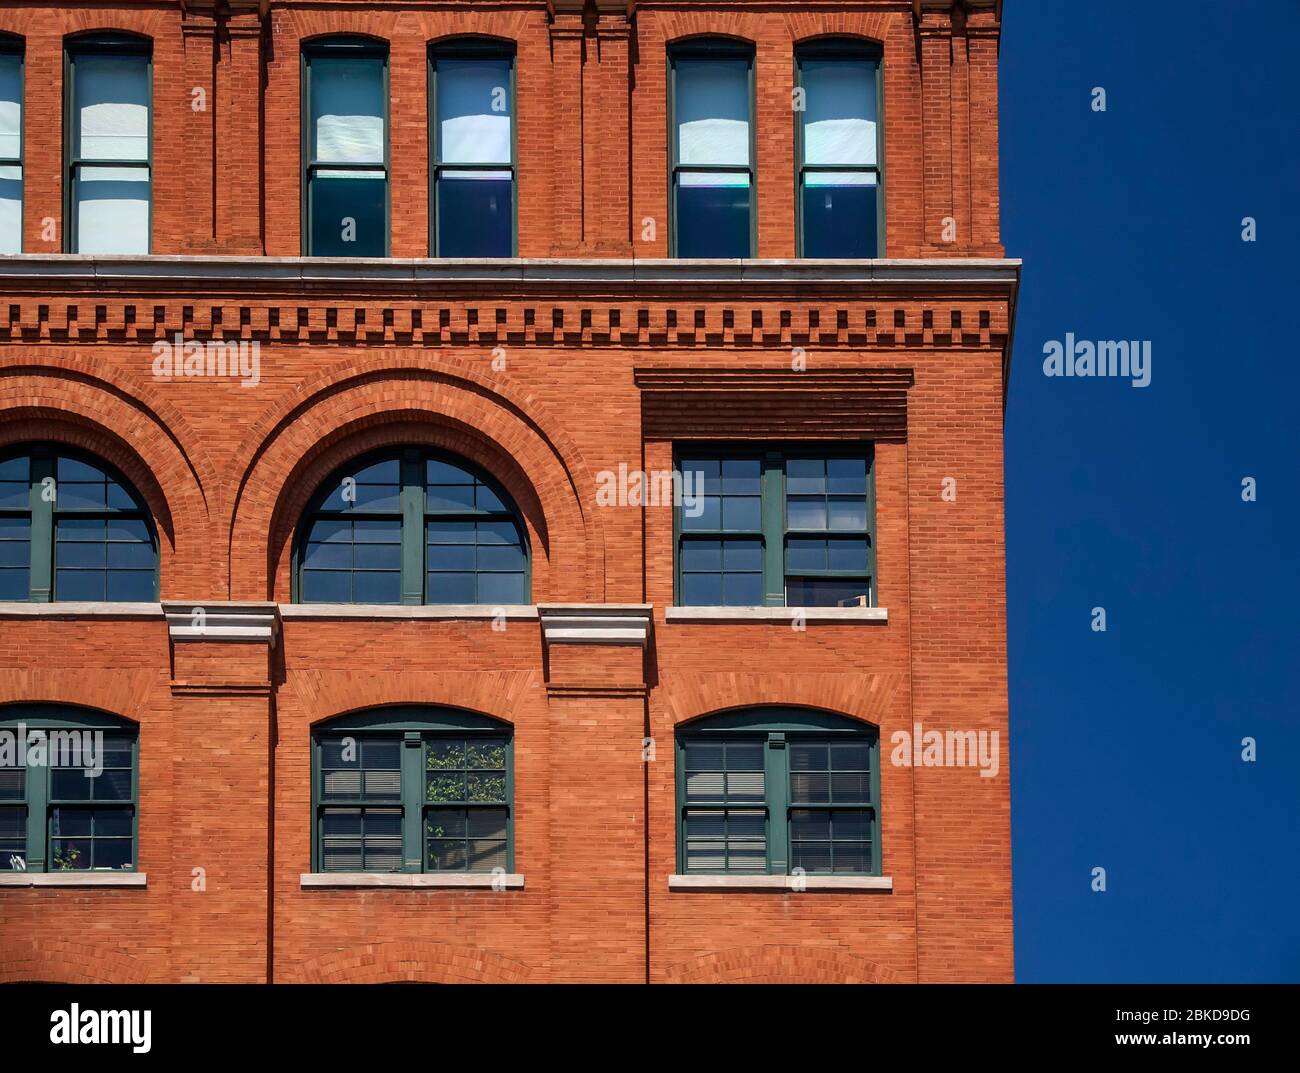 Sixth Floor window (open) on Texas School Book Depository Building in Dallas, Texas from where Lee Harvey Oswald shot and killed US President John F K Stock Photo